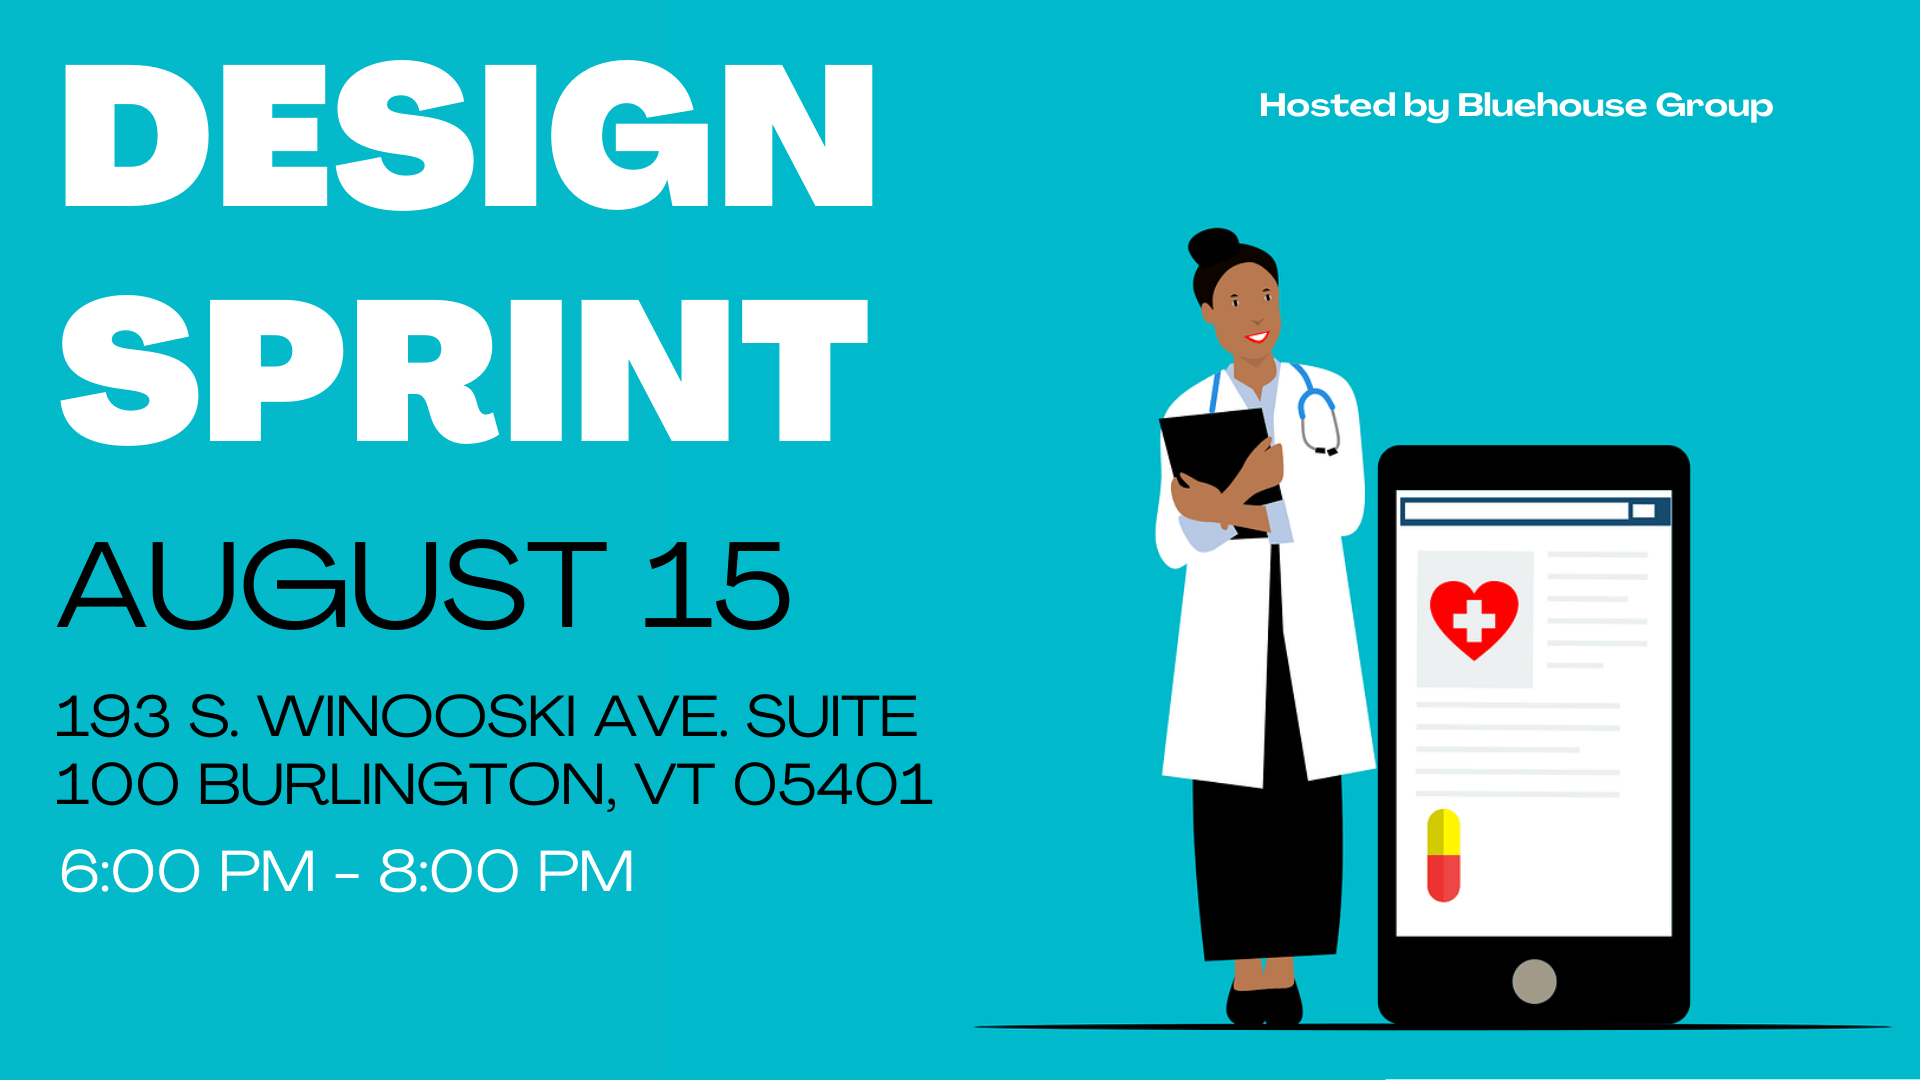 A cover photo for an event with all of the event details: Title, Design Sprint. Date: August 15th. Location: 193 South Winooski Ave, Suite 100, Burlington, VT 05401. Time: 6:00 PM - 8:00 PM. To the right of the details is an illustration of a doctor standing in front of a similarly sized cartoon phone. On the phone are health-related images, such as a heart and a pill.